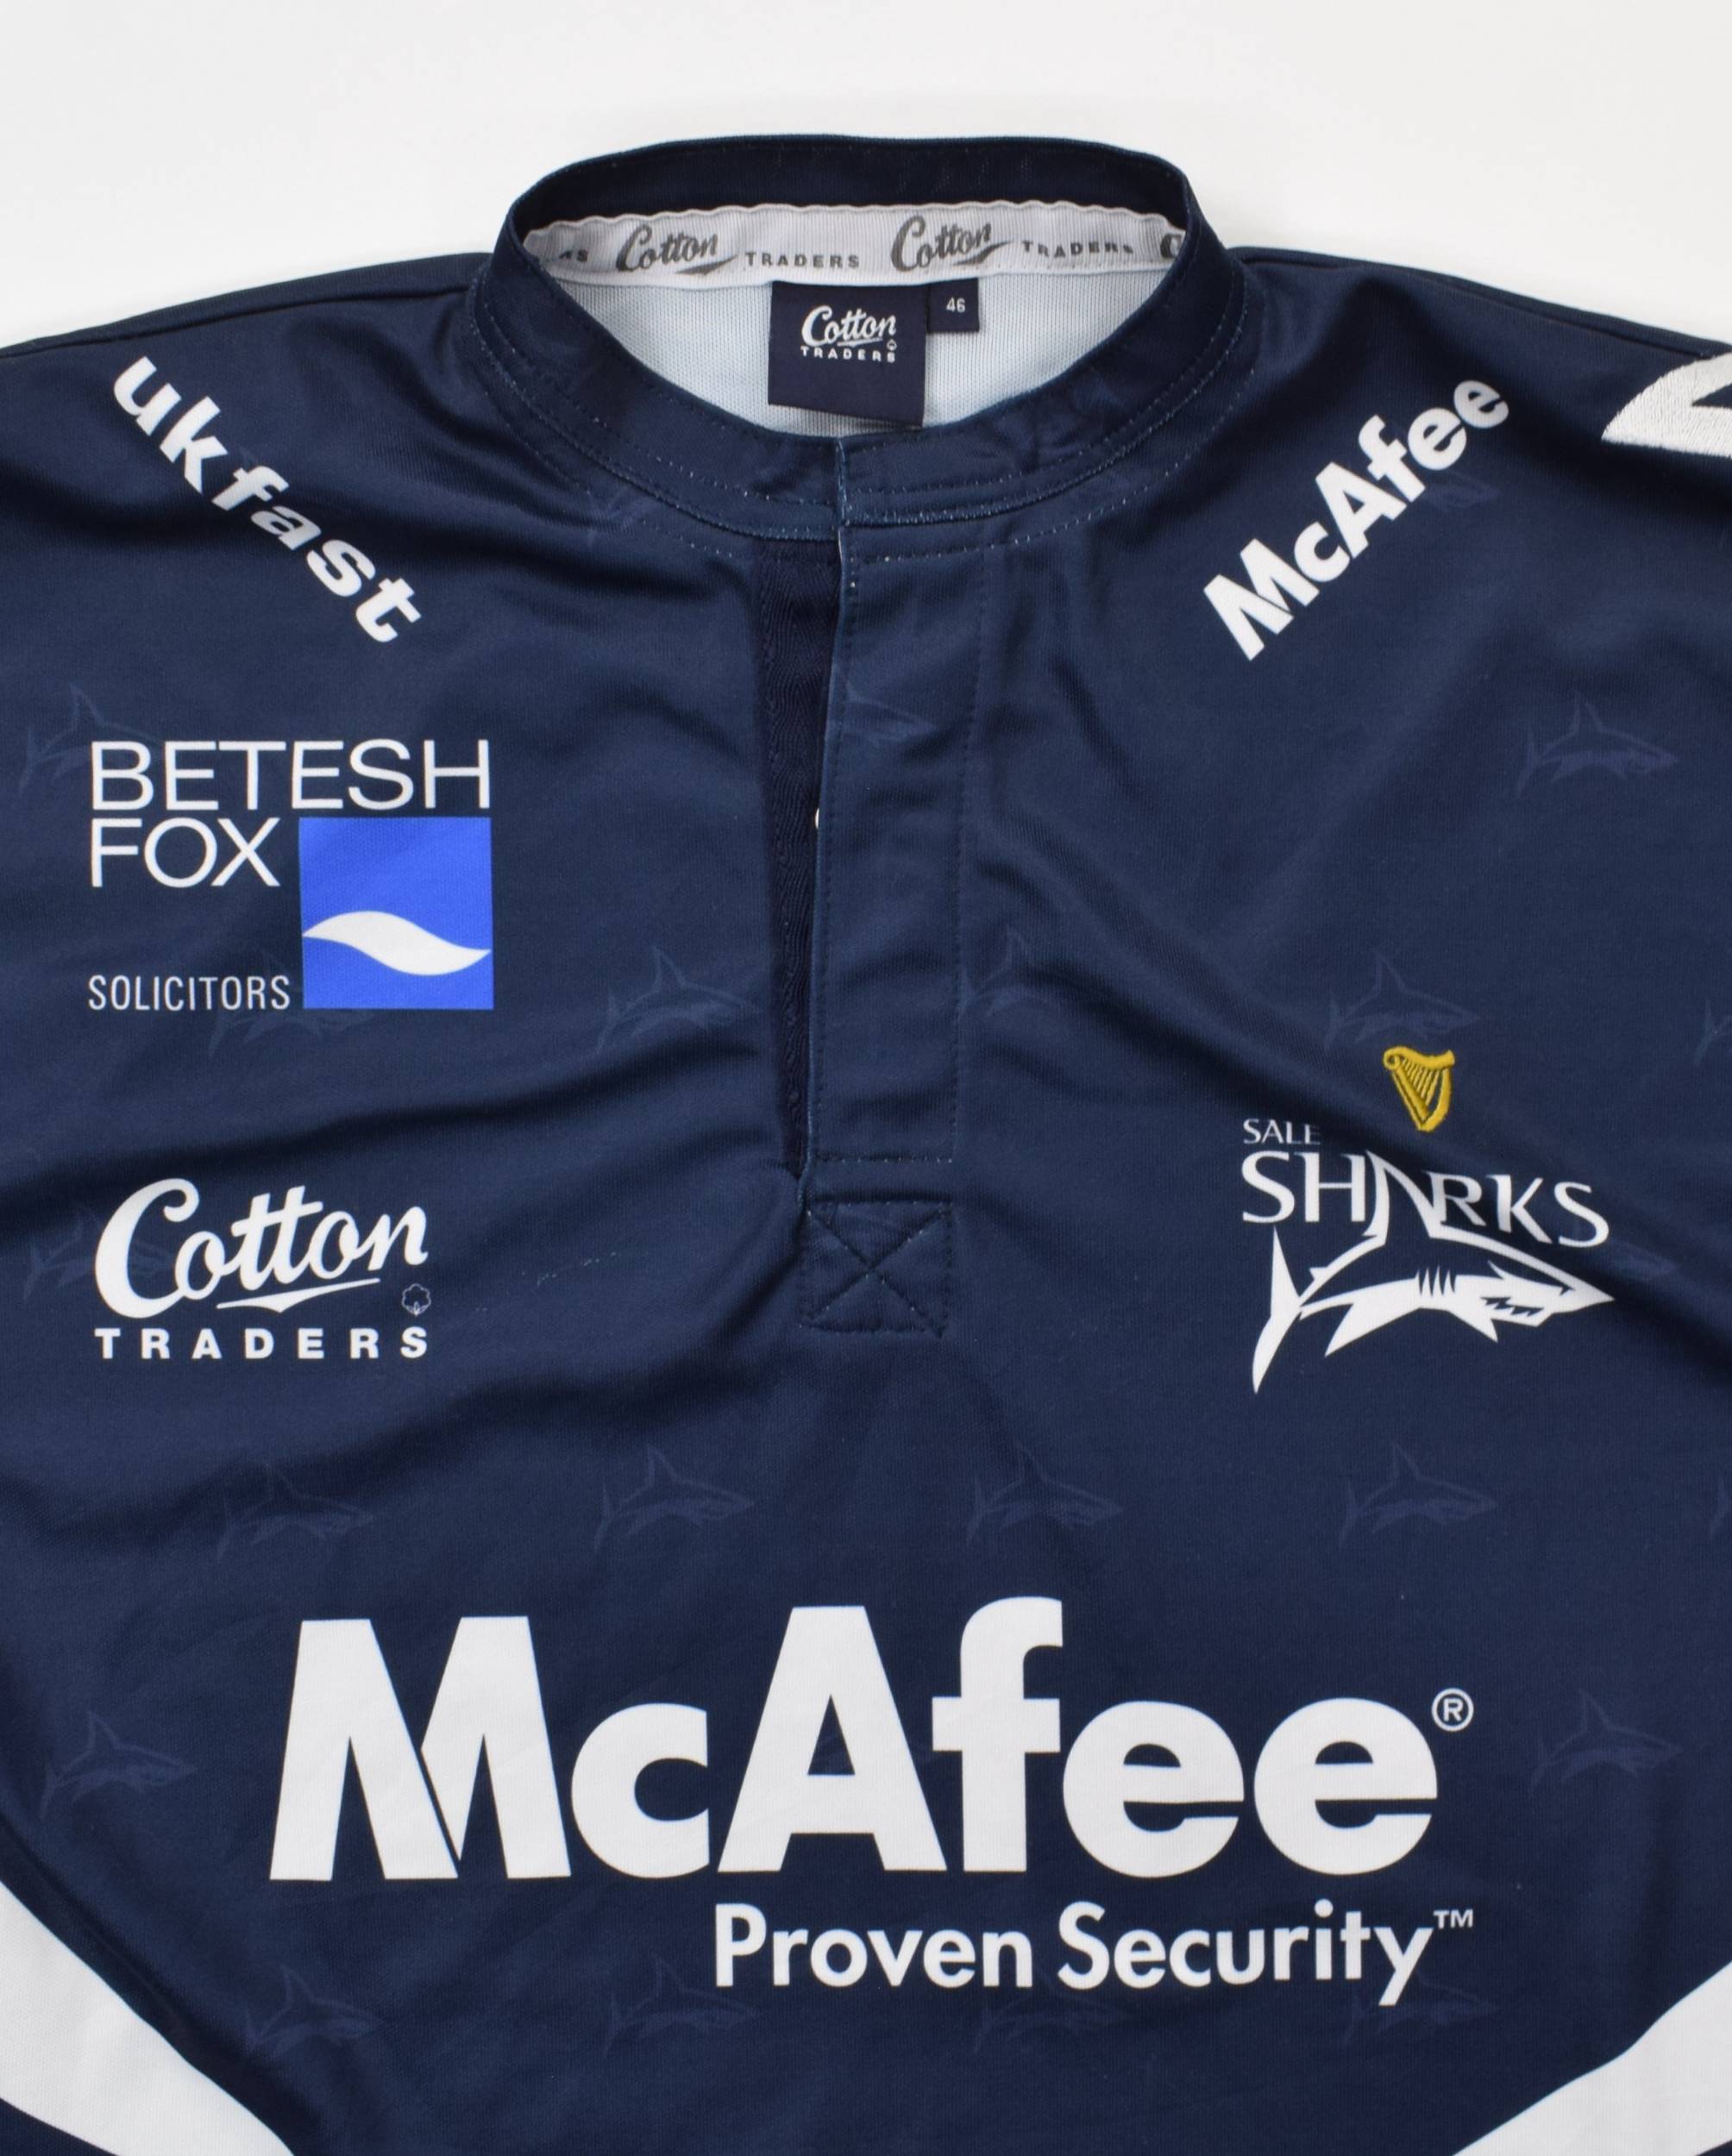 Sale Sharks Jersey Rugby Union 2009/2010 Retro Vintage Shirt Mens Size  Adult M